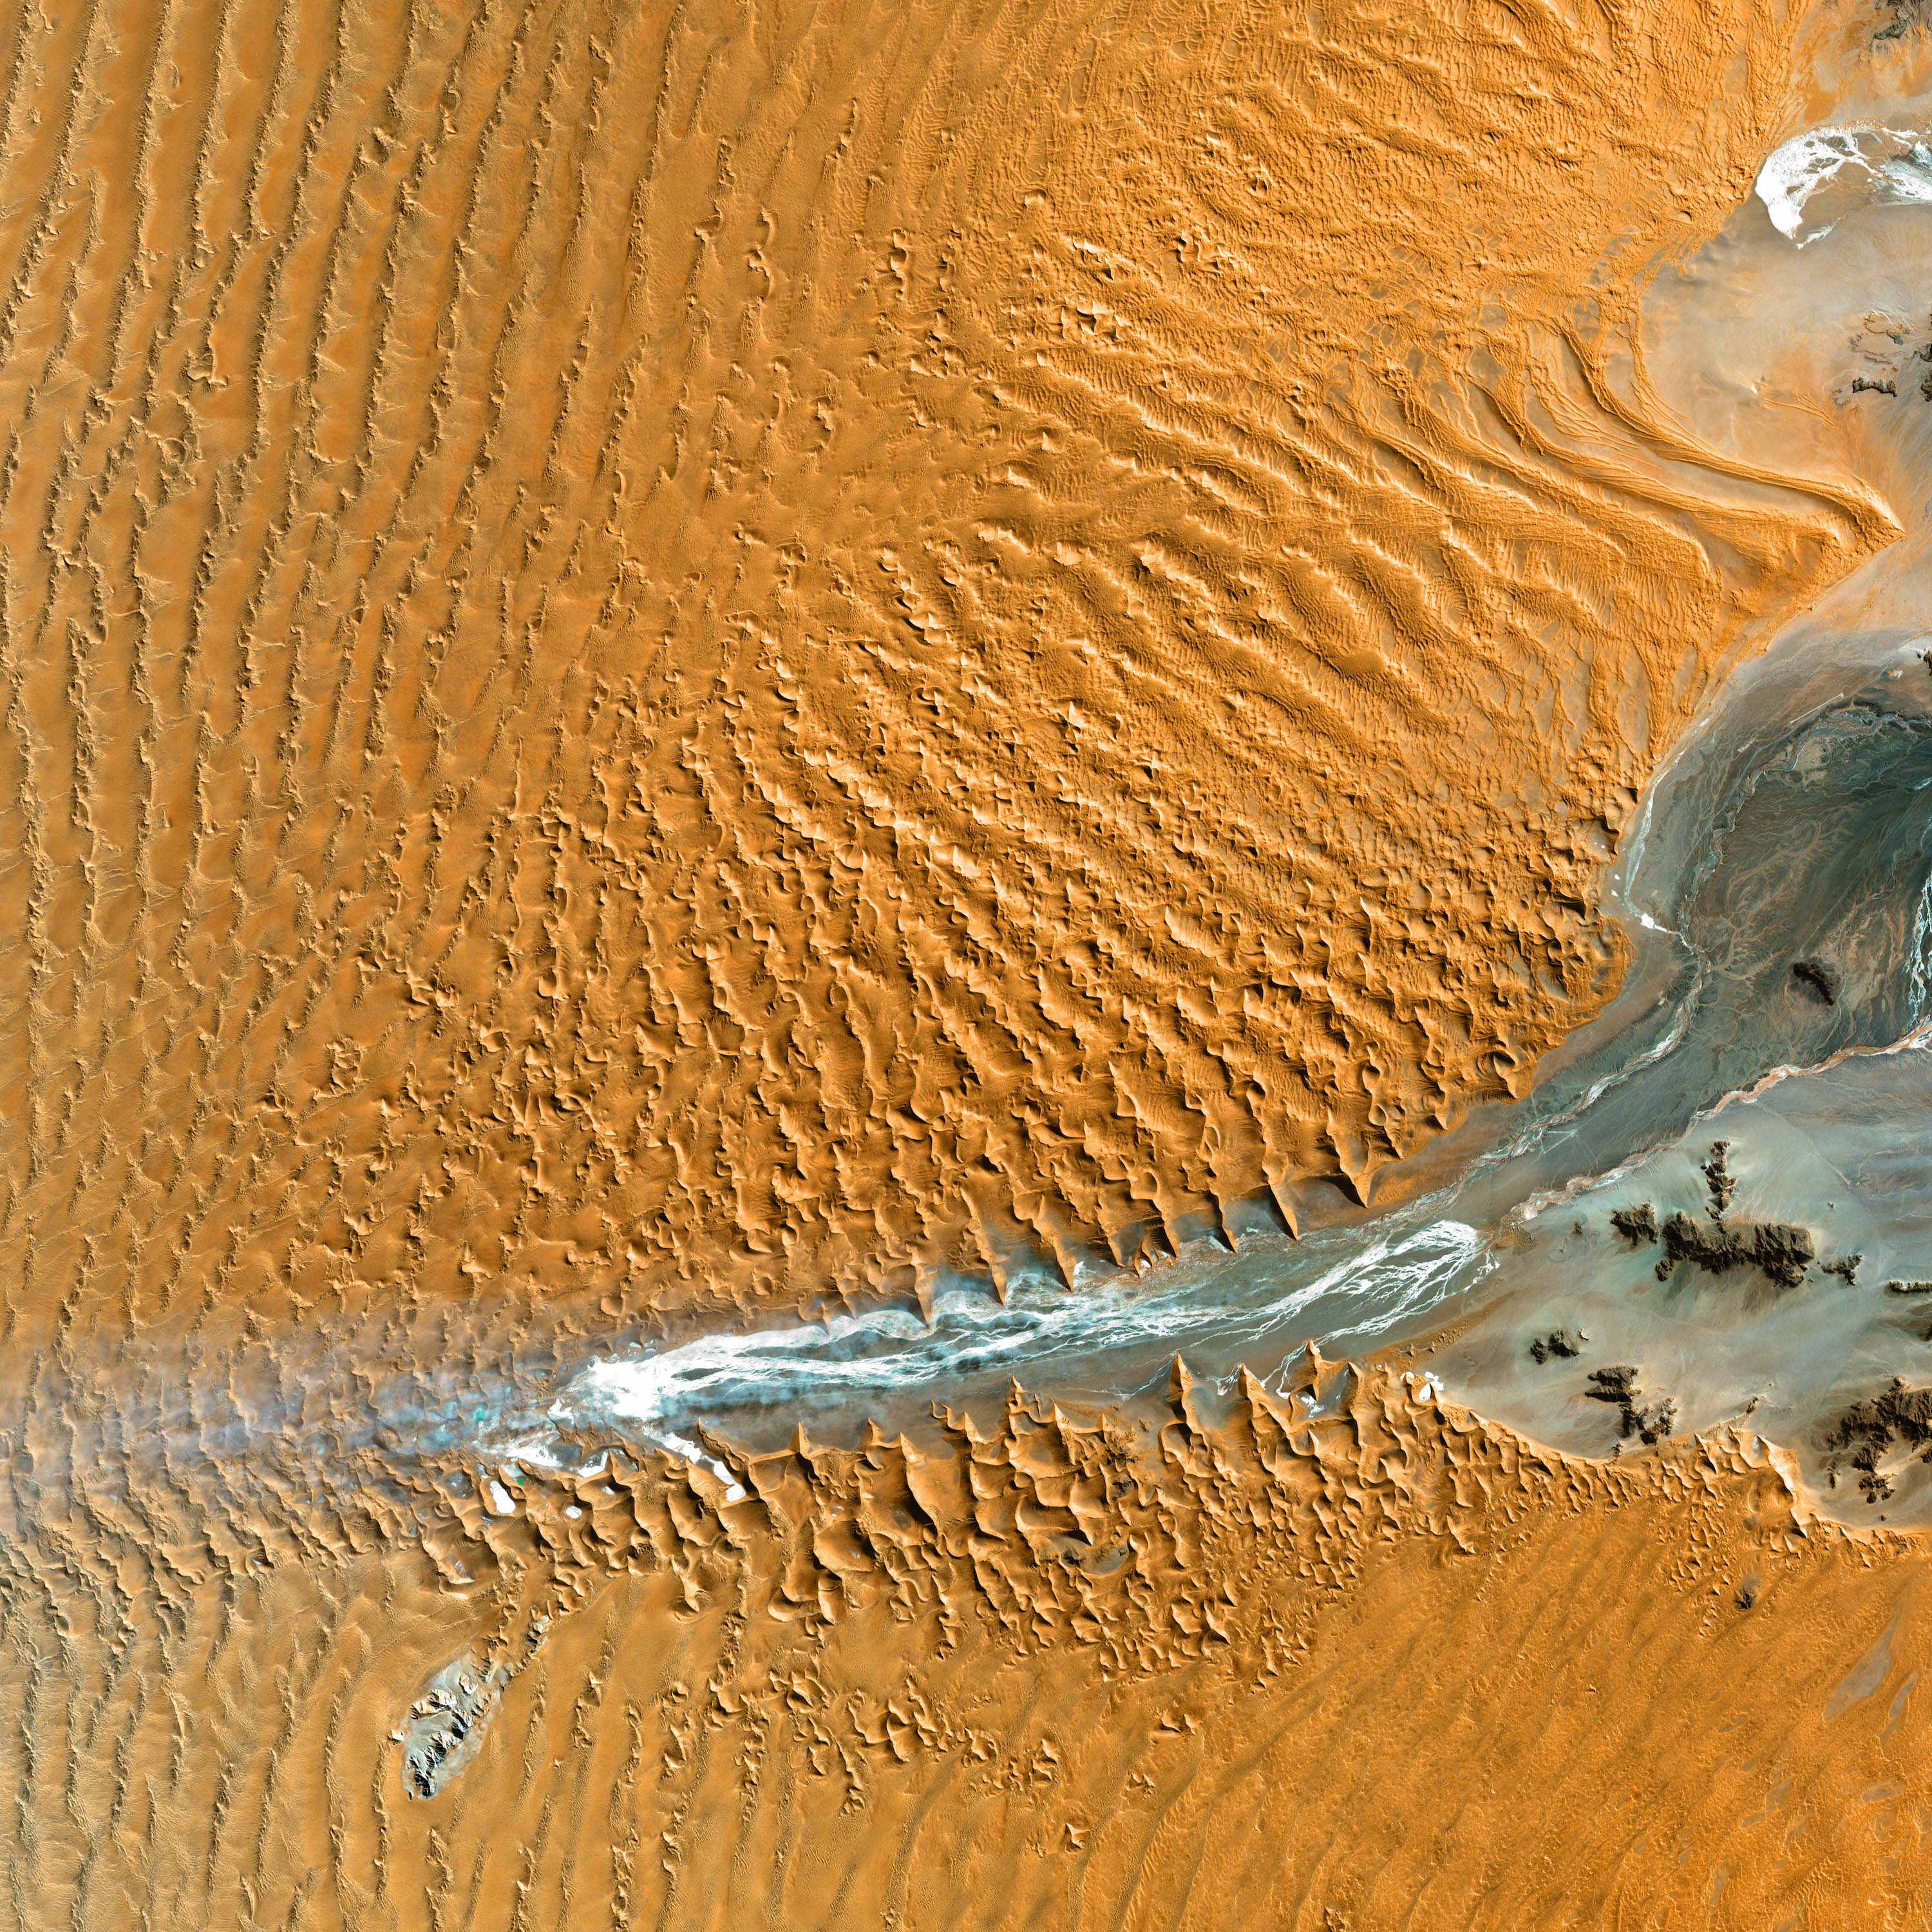 Namib-Naukluft National Park dunes from space